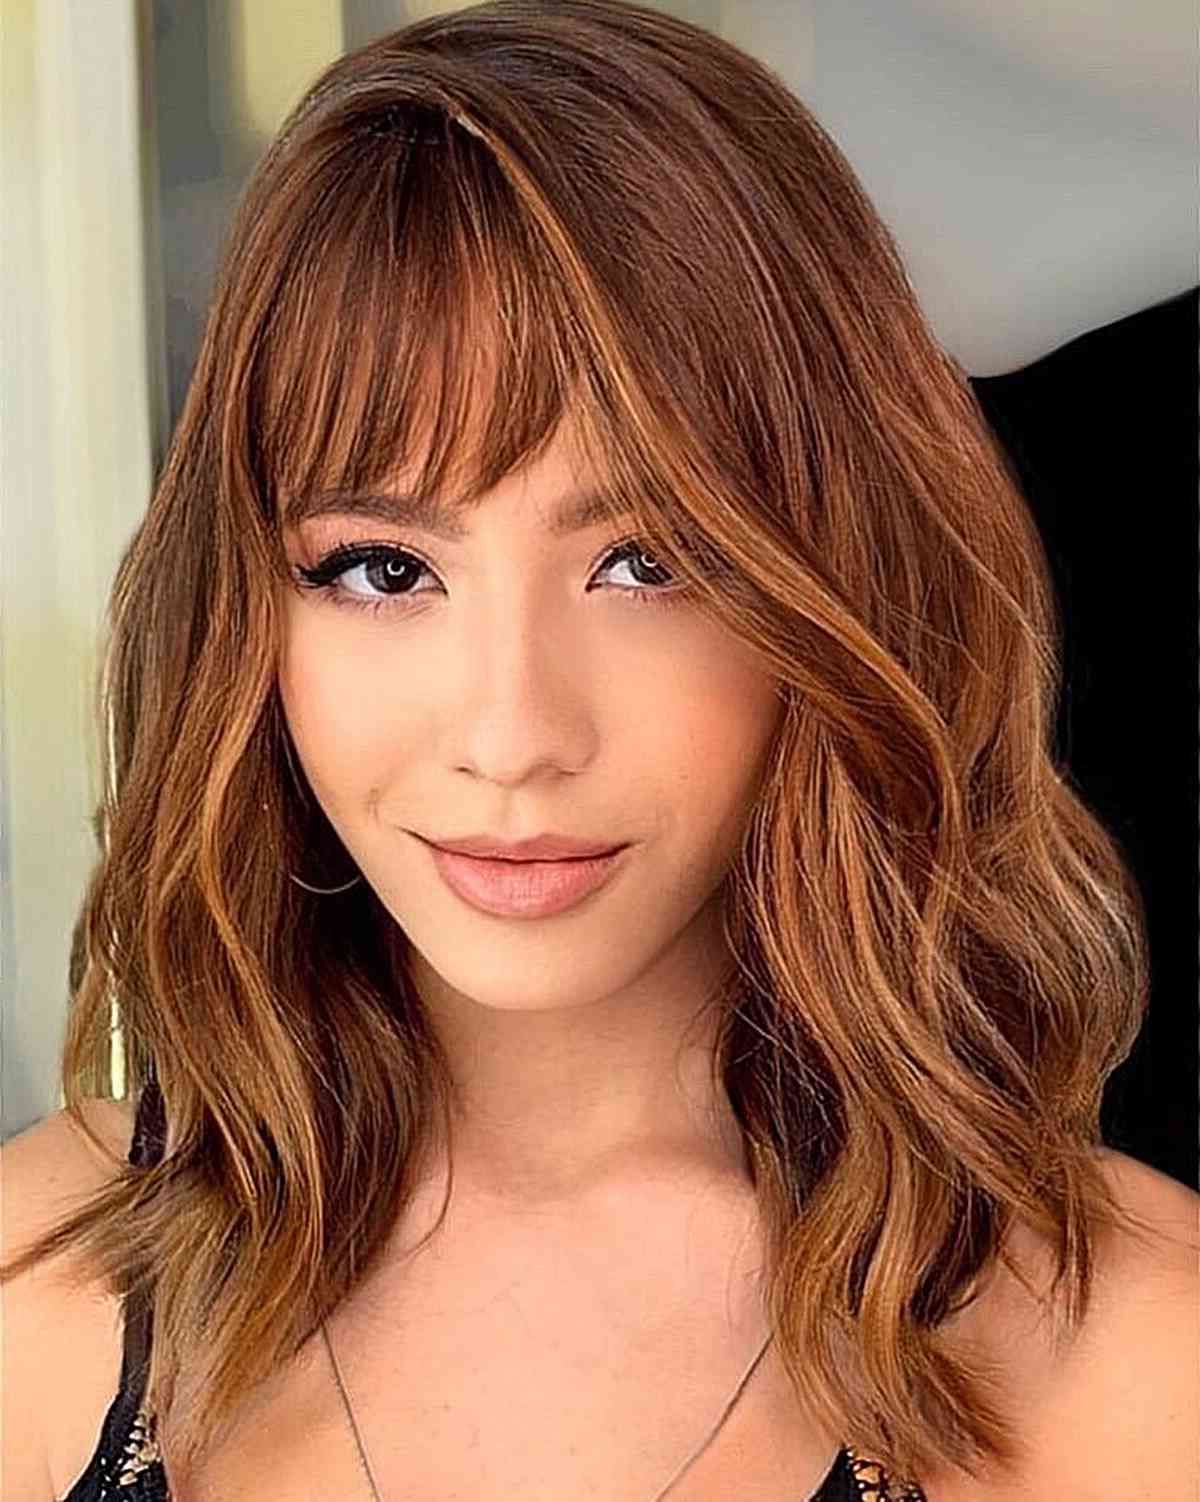 Trendy Side Swept Bangs With Shoulder Length Hair In 63 Cute Shoulder Length Hair With Bangs For An Instant Makeover (View 14 of 15)